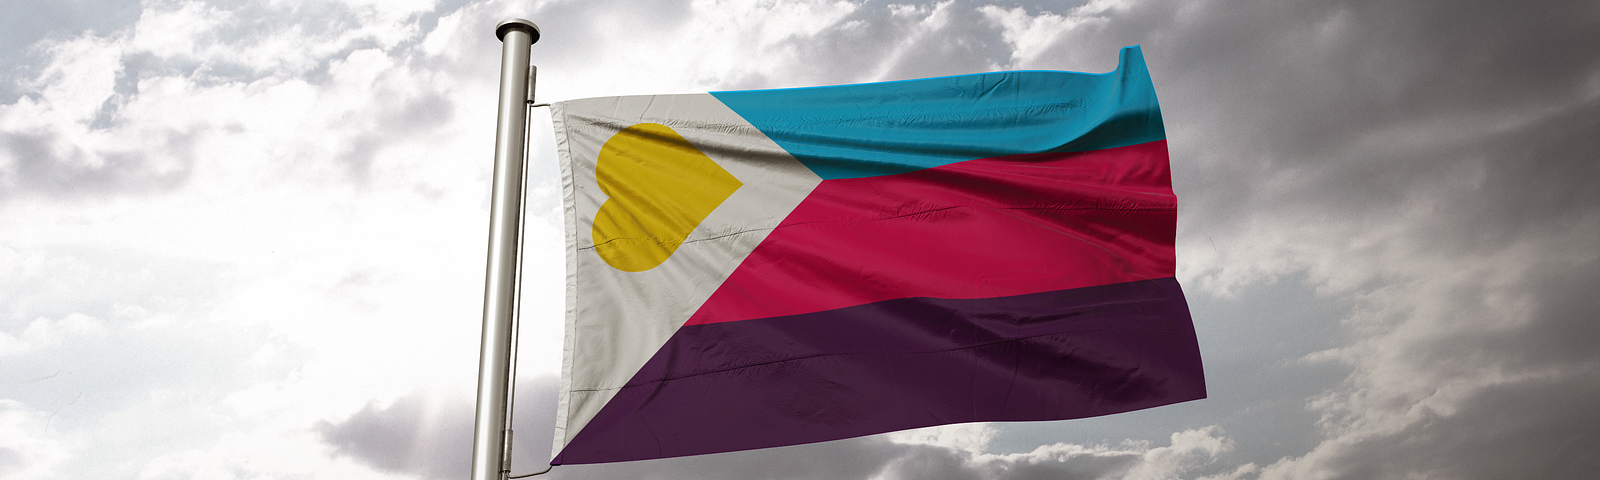 The Polyamory Pride Flag flying at mast against sky with the sunlight shining through the clouds. A tricolour flag with red, blue, and purple stripes, with a white chevron with a gold heart.